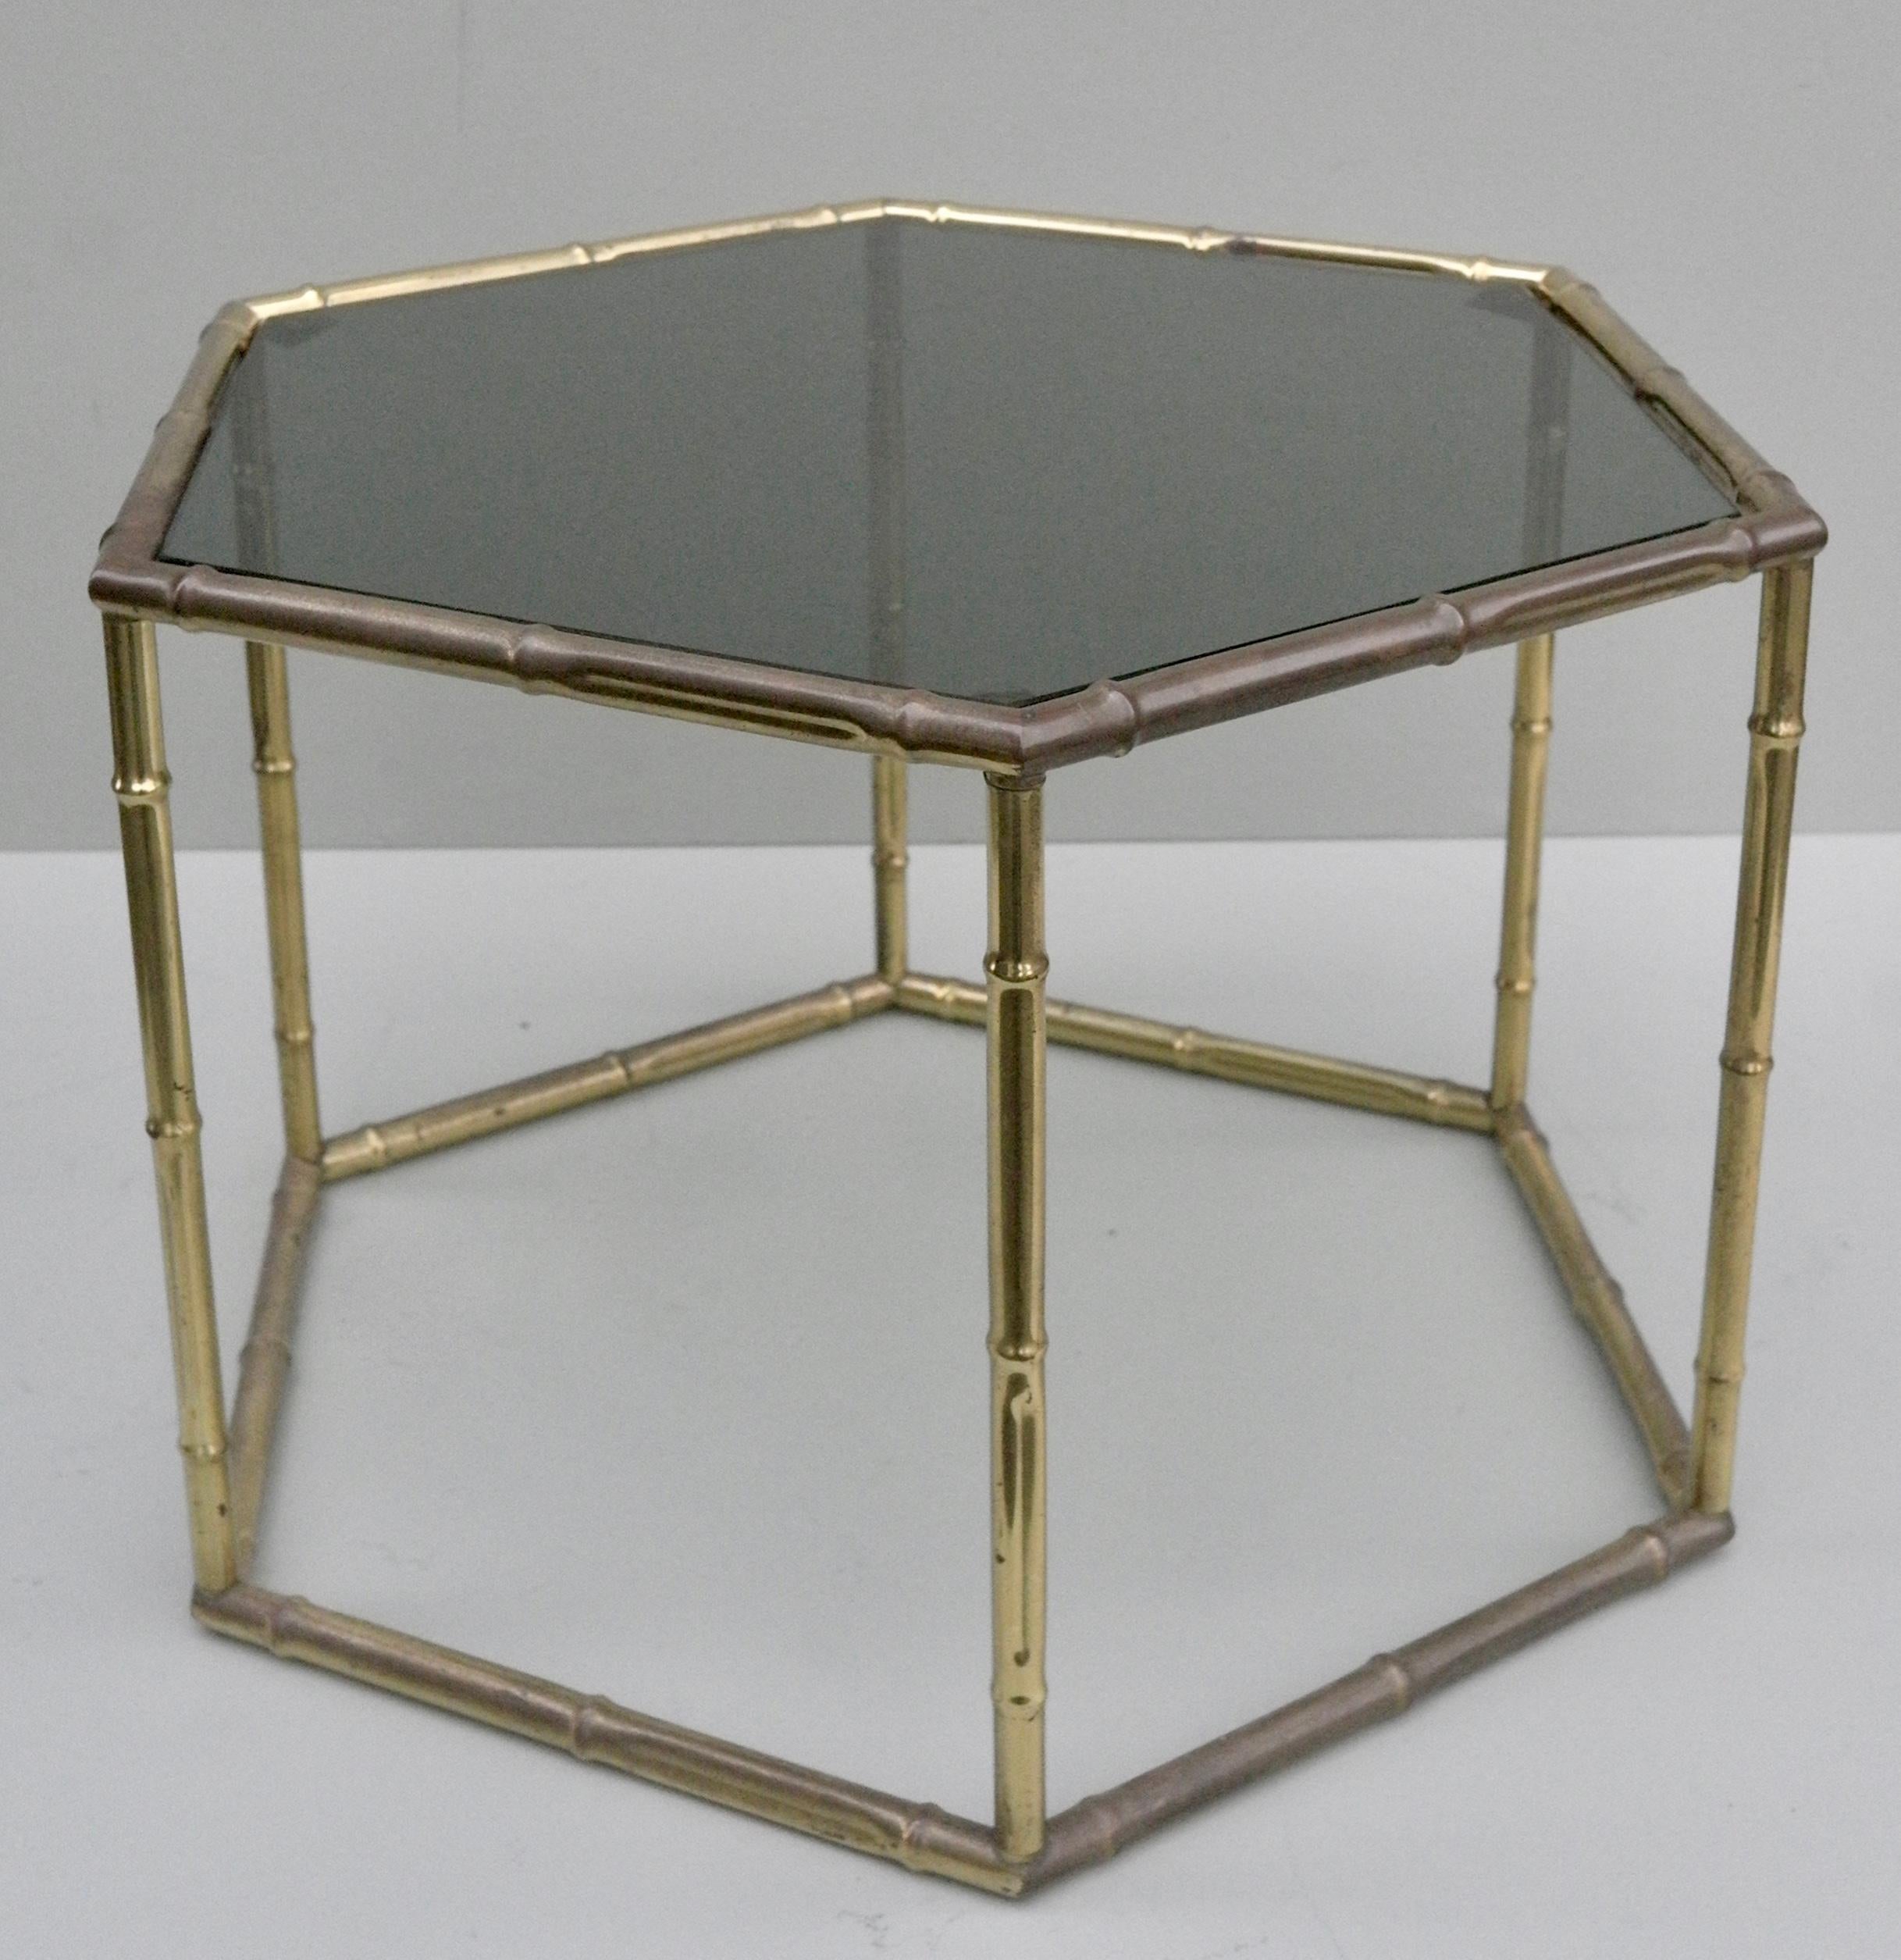 Mid-20th Century French Symmetrical Gold Metal Bamboo Side Table with Dark Glass Top For Sale